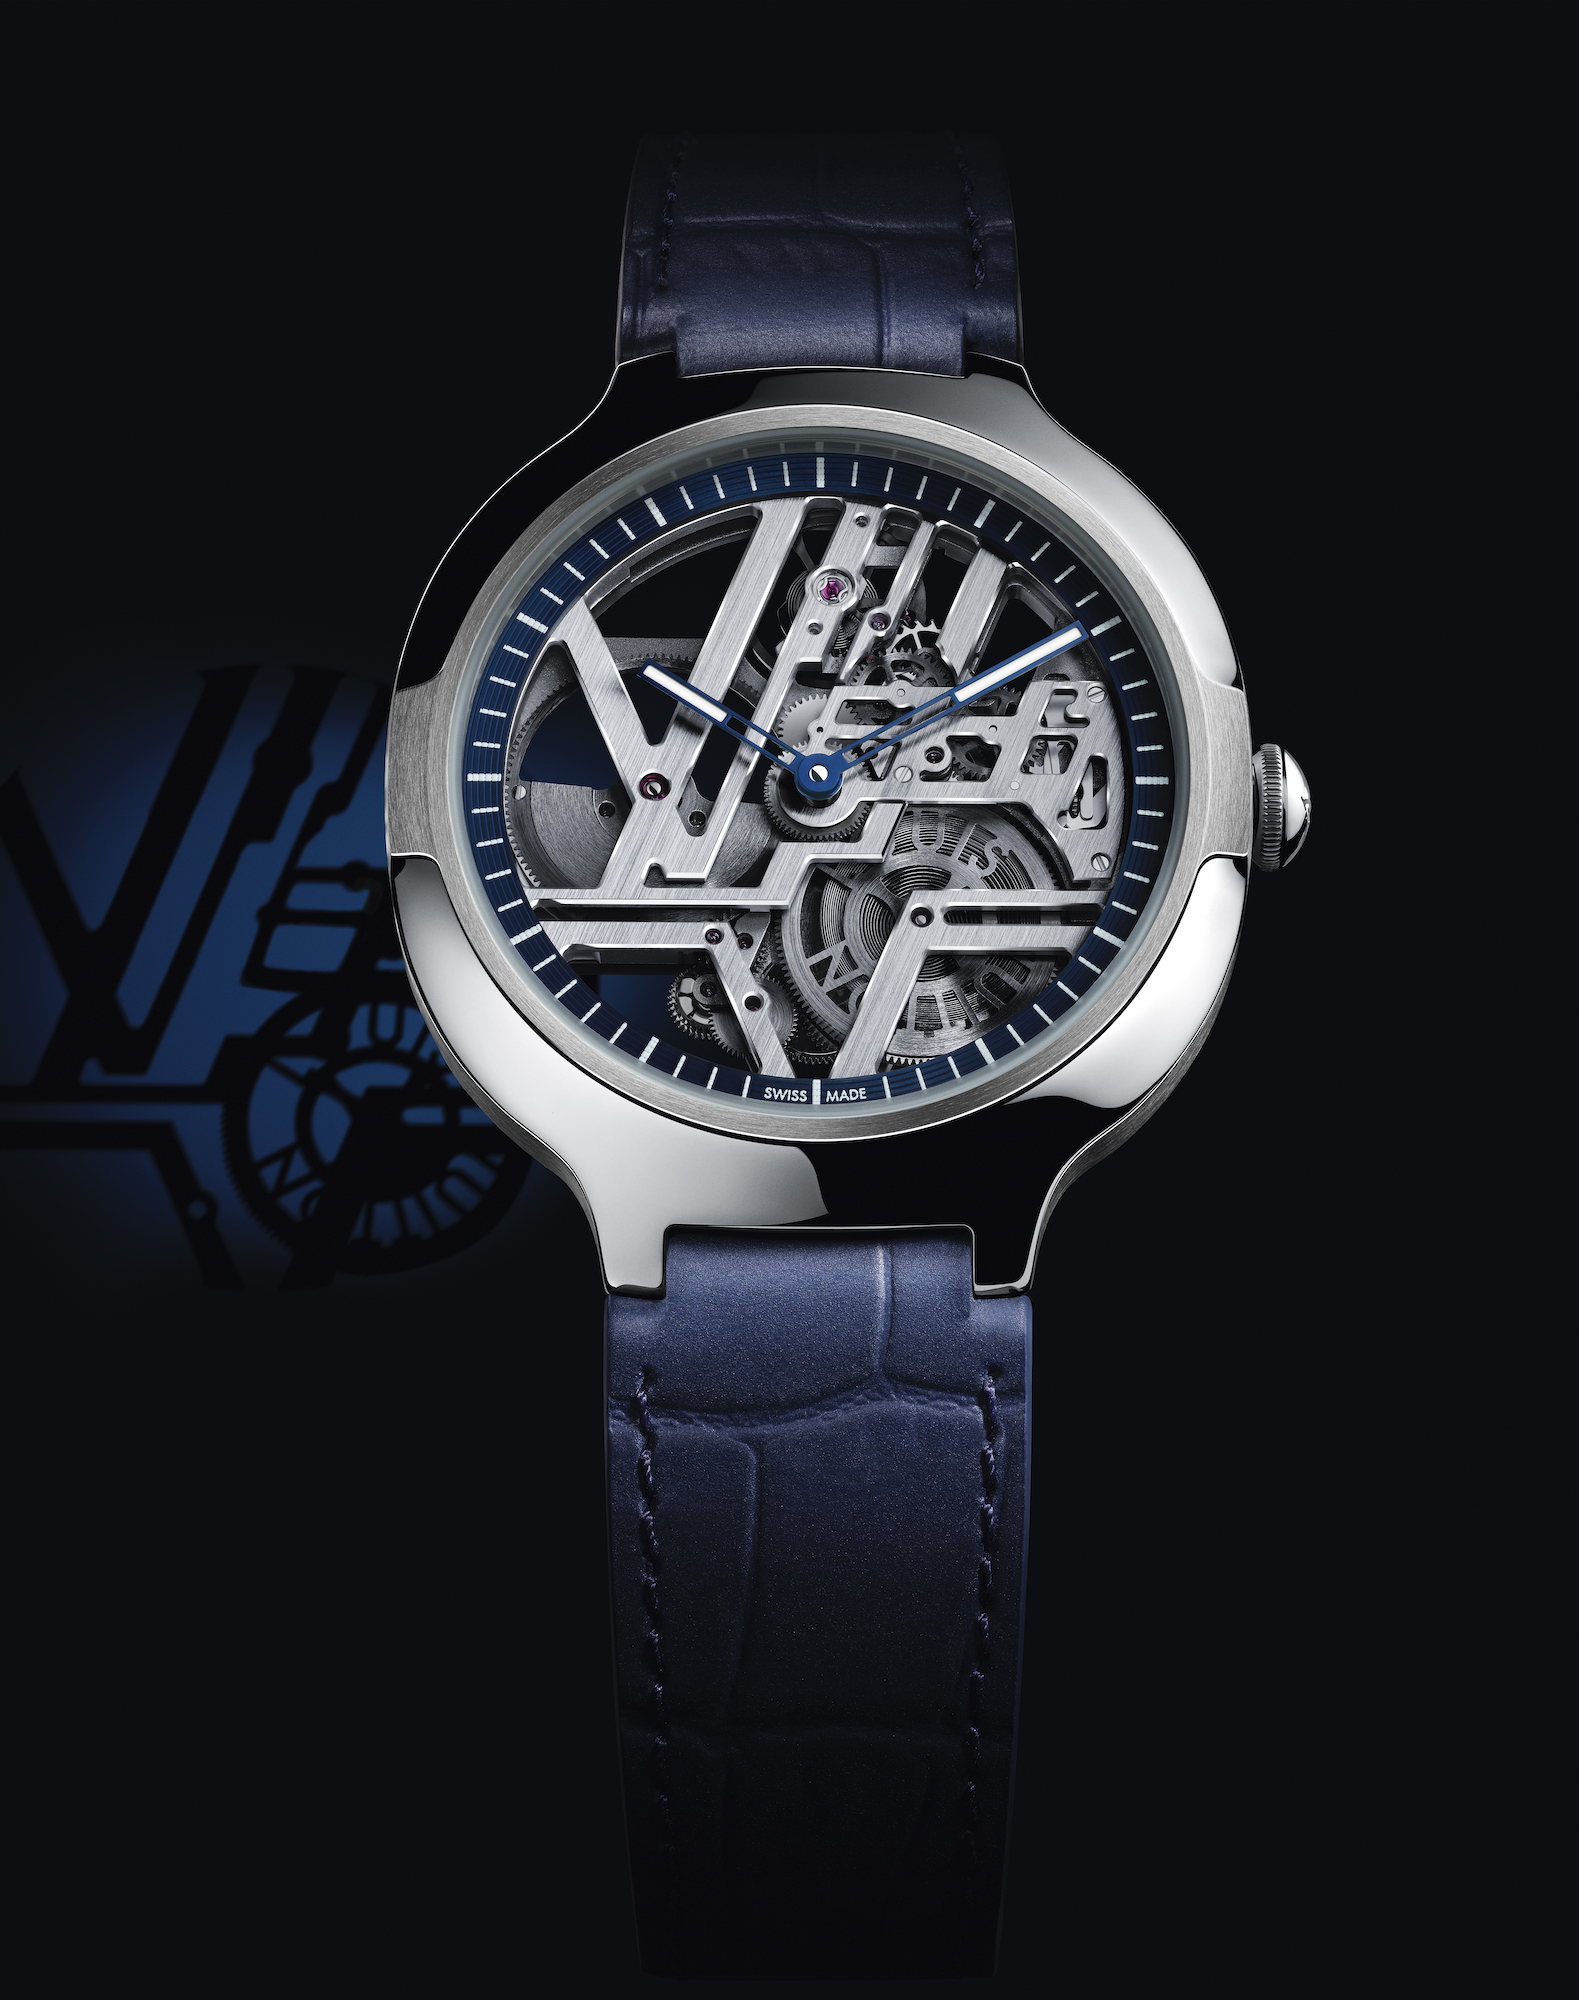 Introducing Louis Vuitton Sings A New Song With The Tambour